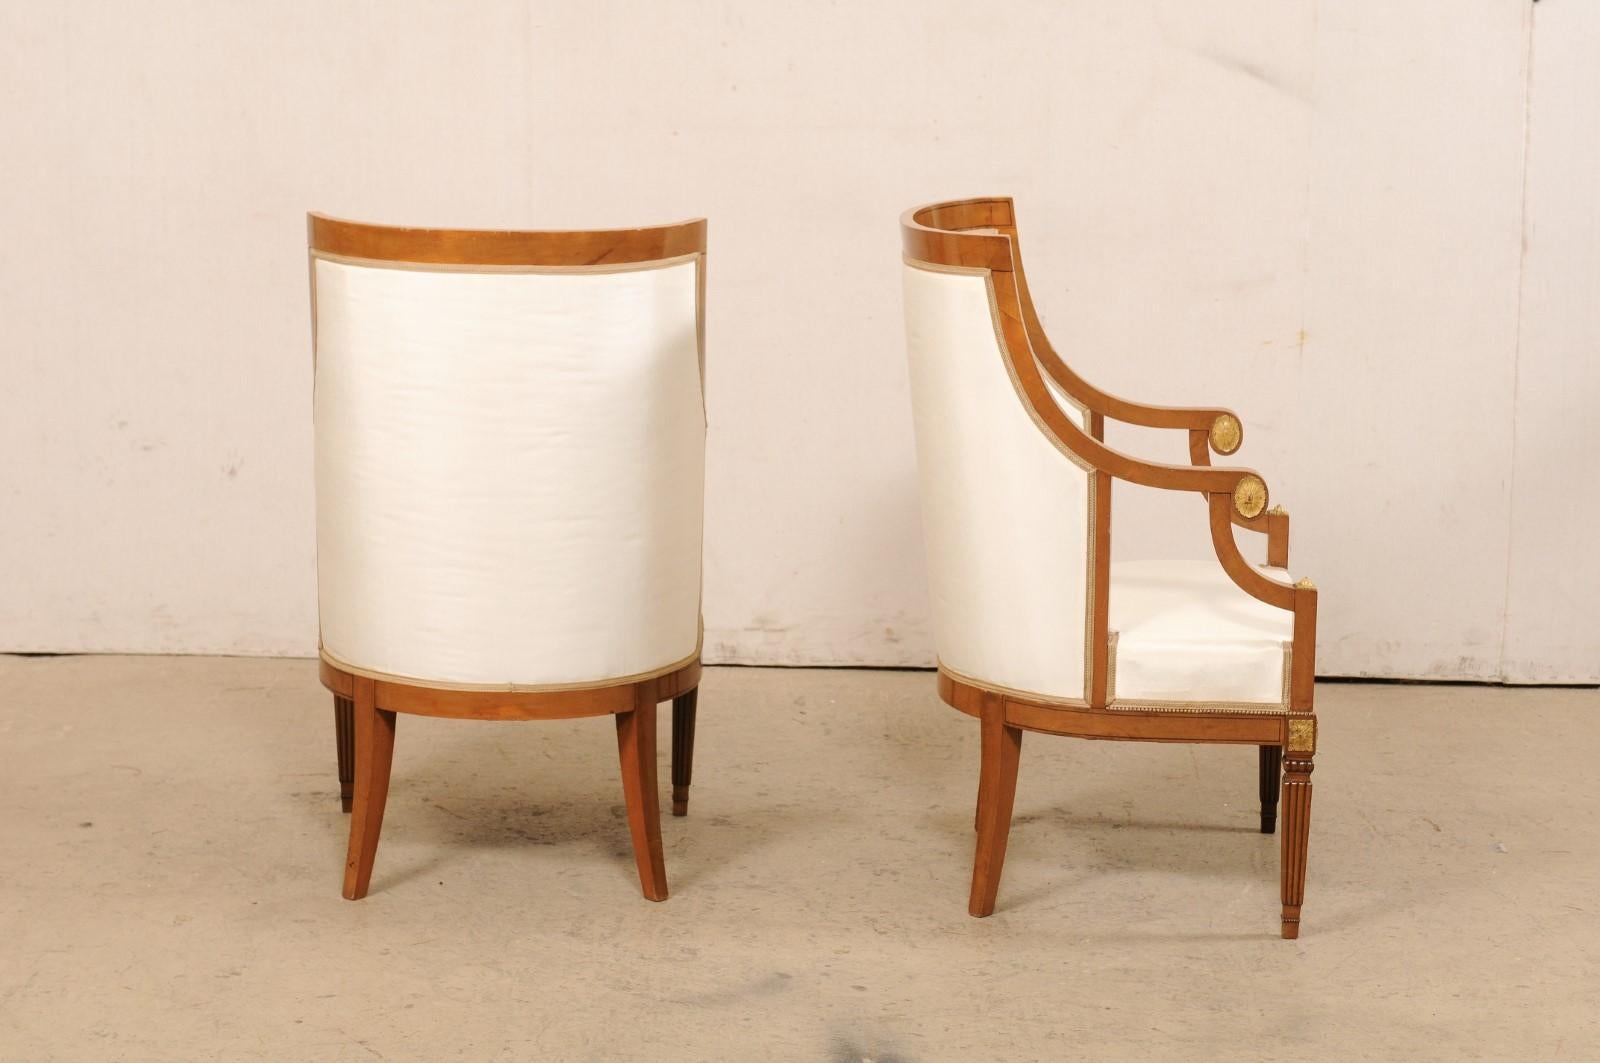 Italian Pair of Barrel-Back Carved-Wood & Upholstered Armchairs Mid-20th Century For Sale 4